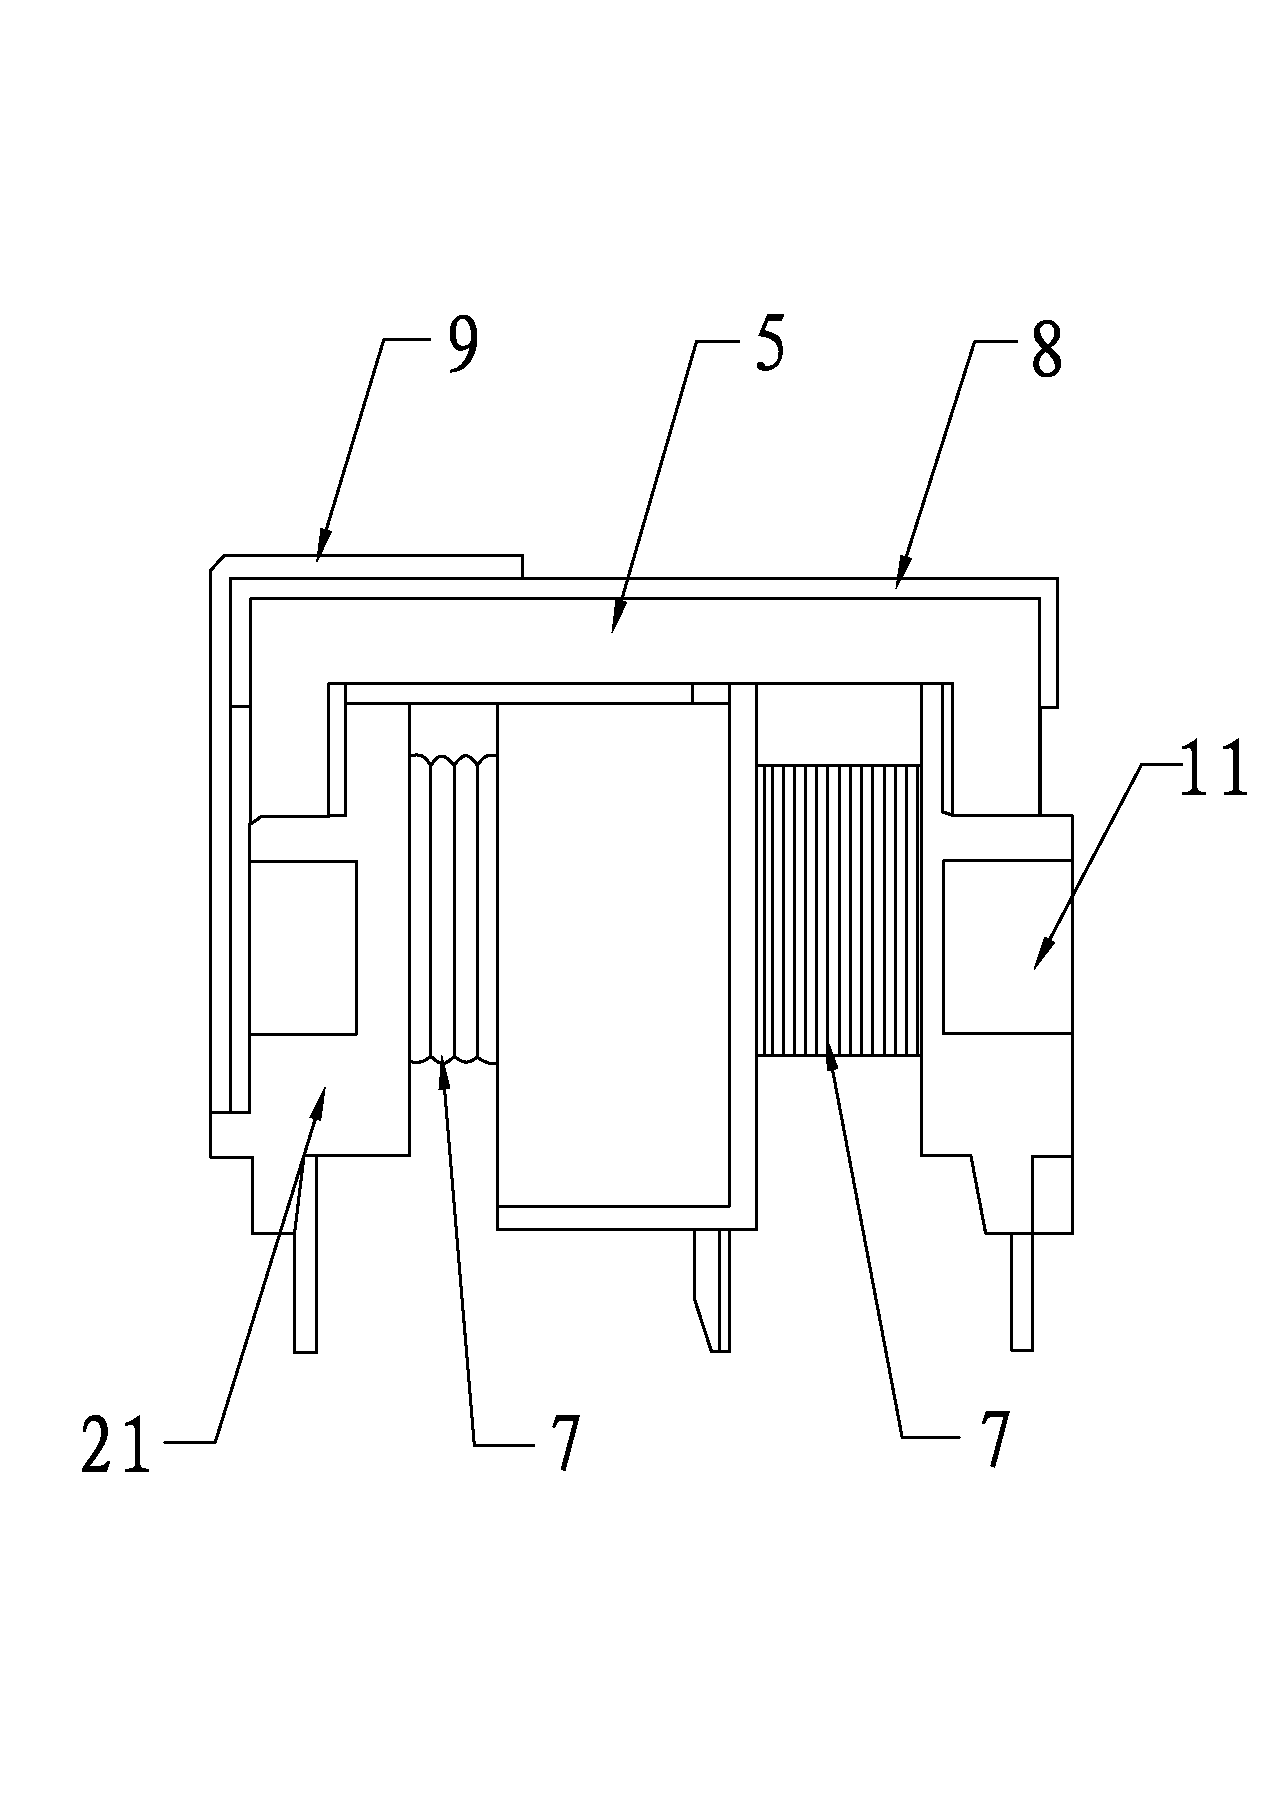 Ultrathin high-frequency magnetic core transformer and production process thereof